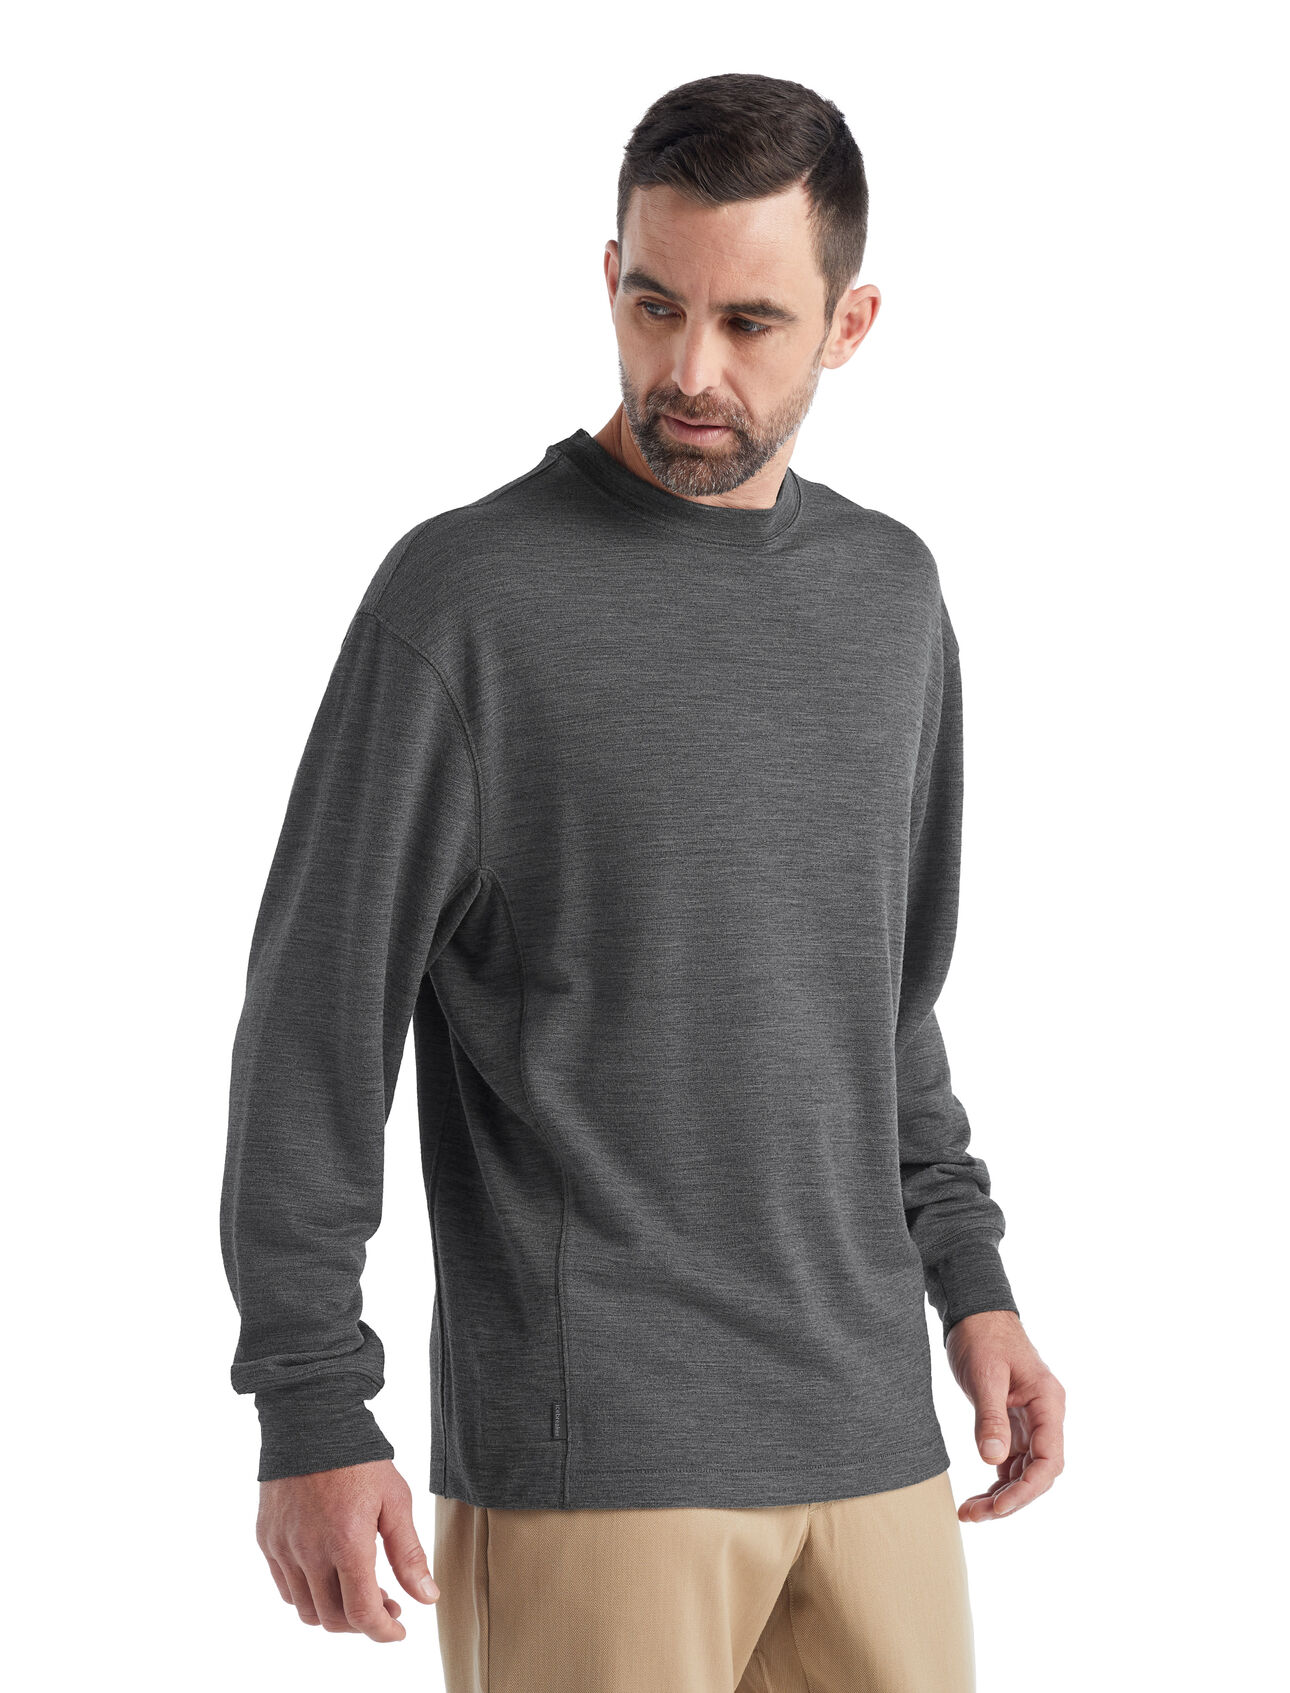 Mens Merino Dalston Terry Long Sleeve Sweatshirt  An everyday sweatshirt with added style details designed to be worn alone or layered for casual comfort, the Dalston Terry Long Sleeve Sweatshirt features a soft and breathable, 100% merino wool body.